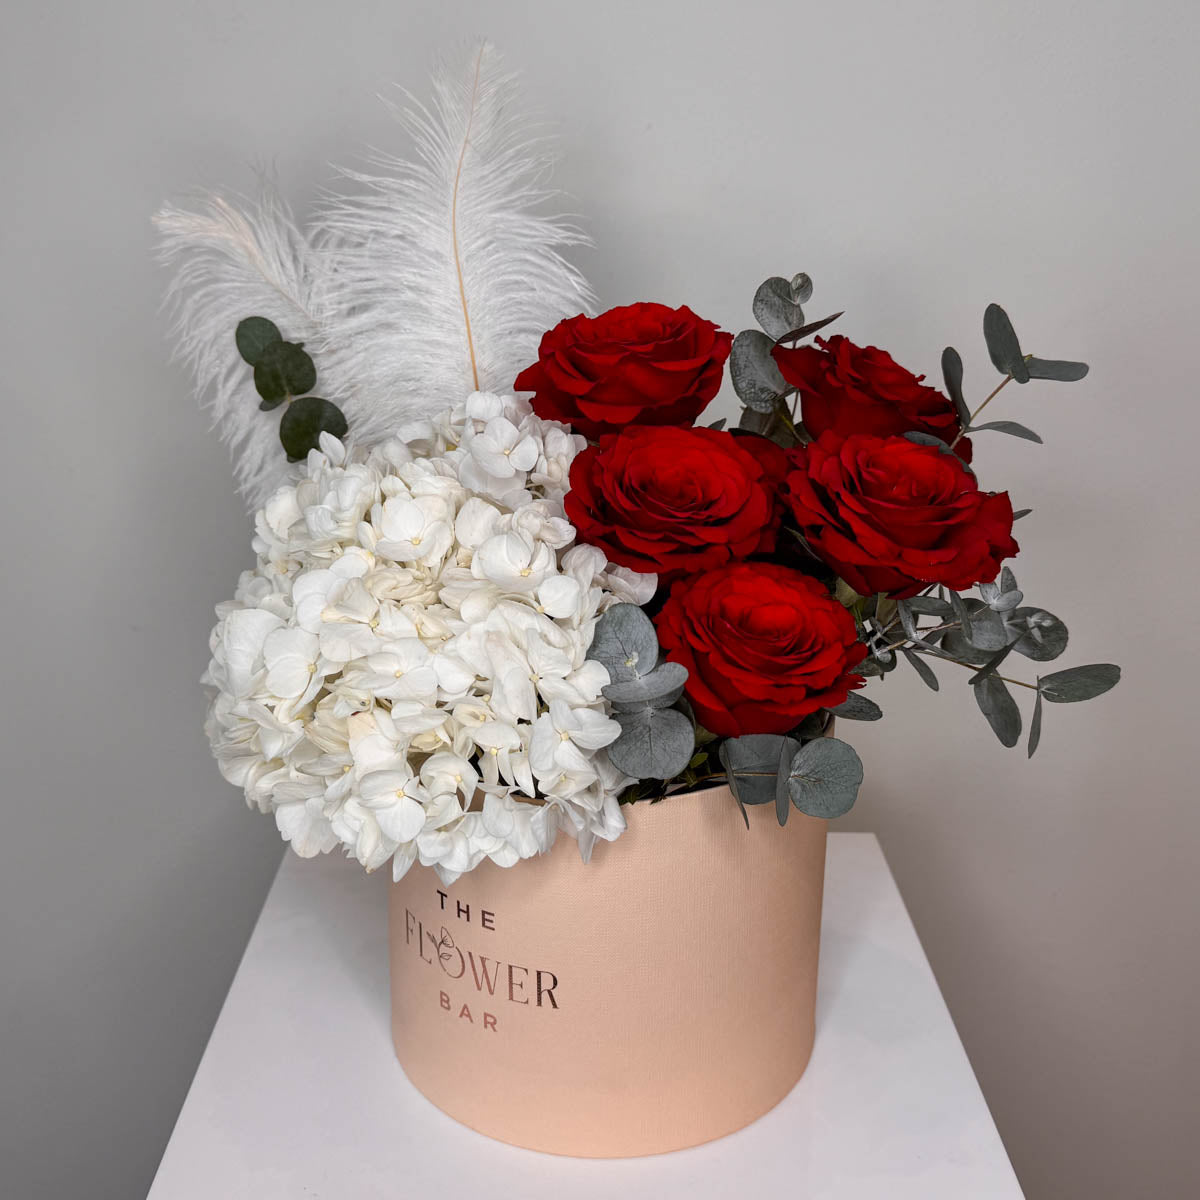 Flowers With Gifts For Valentine's Day